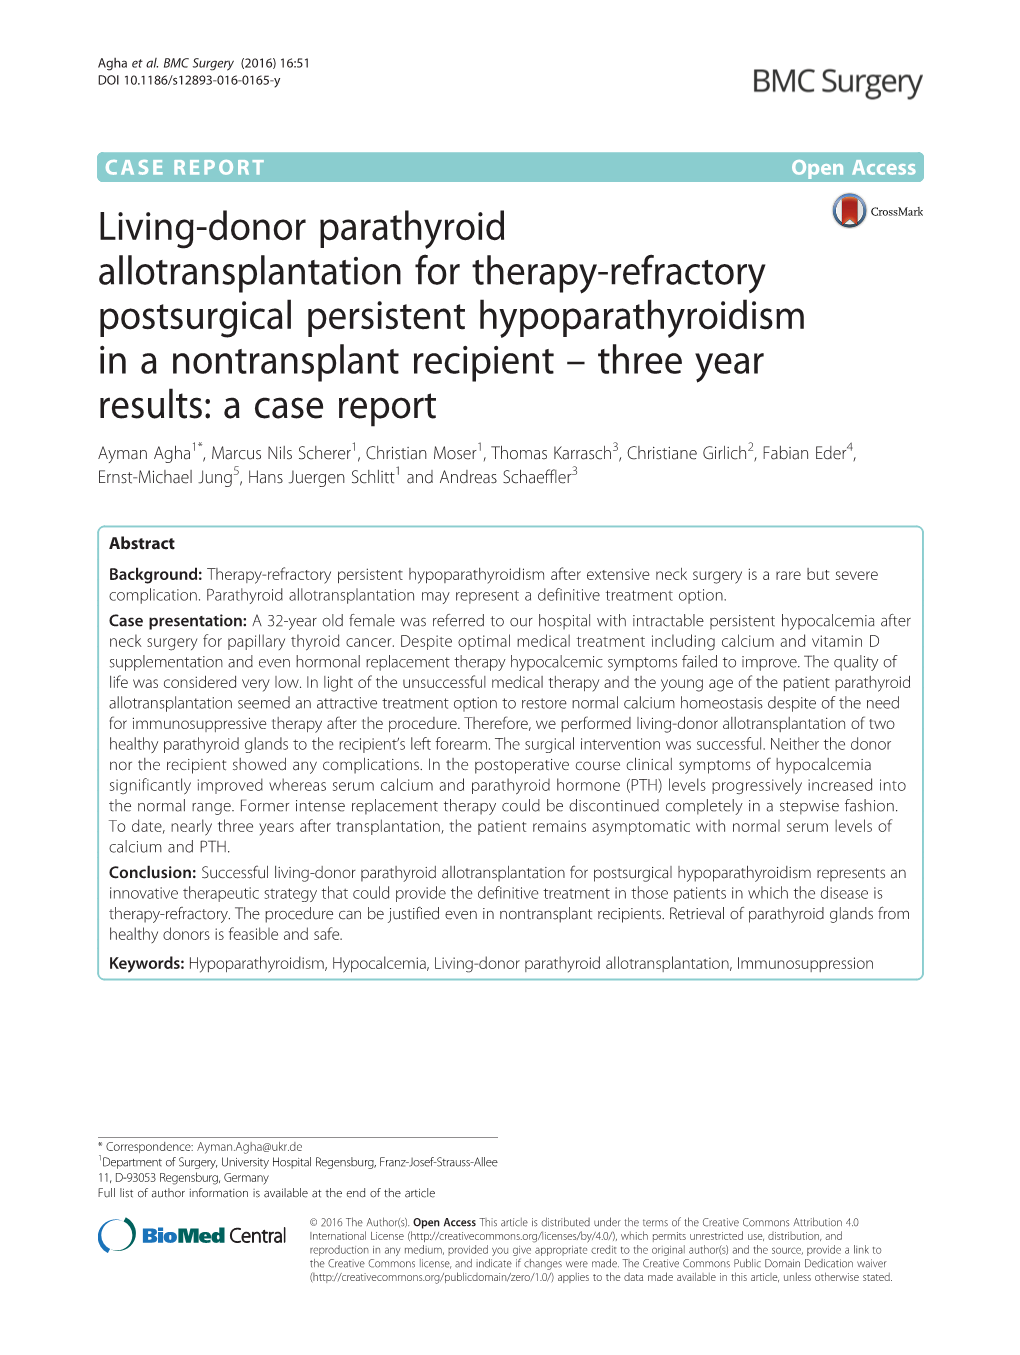 Living-Donor Parathyroid Allotransplantation for Therapy